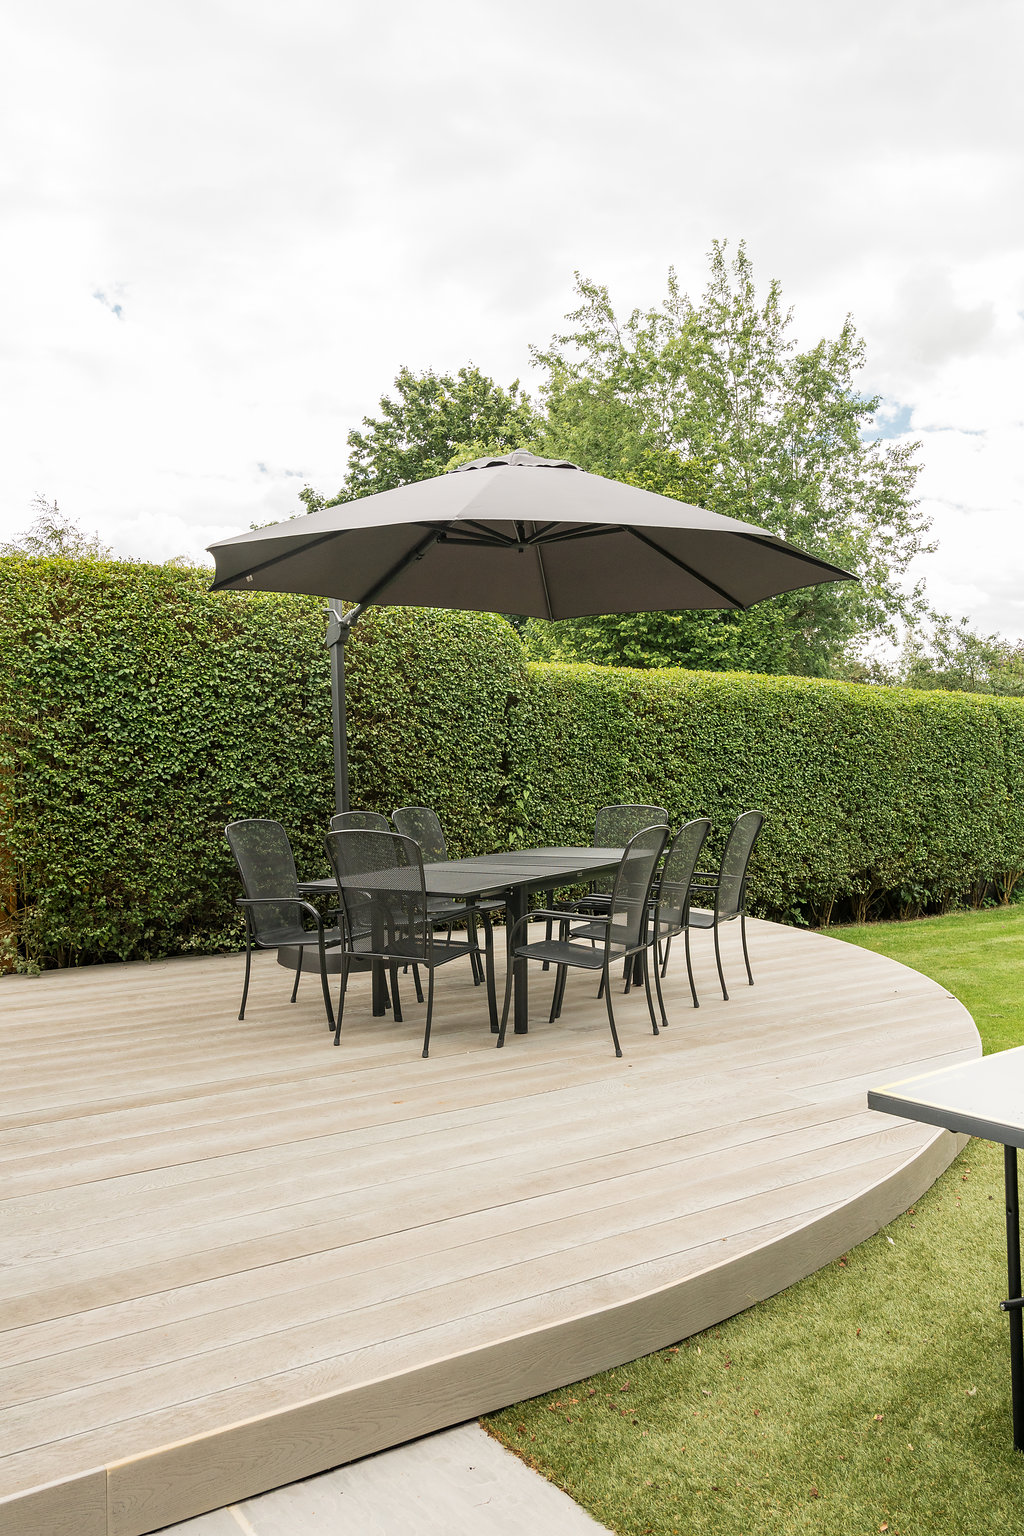 outdoor furniture on landscaped patio area